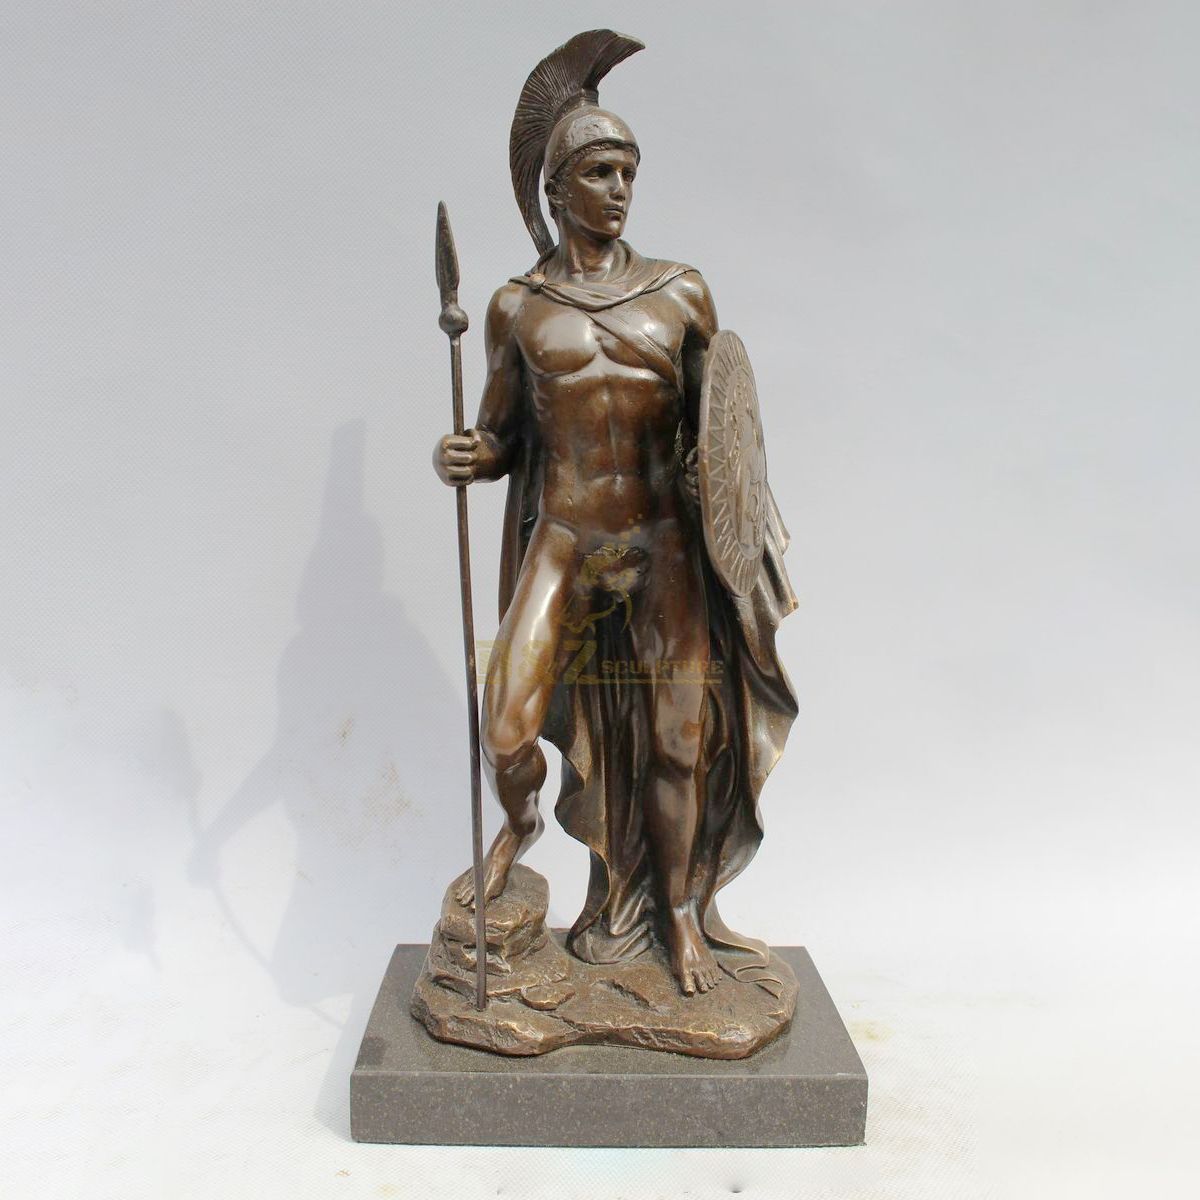 outdoor decor life size metal art casting sparta Warrior antique bronze roman soldiers statue with spear